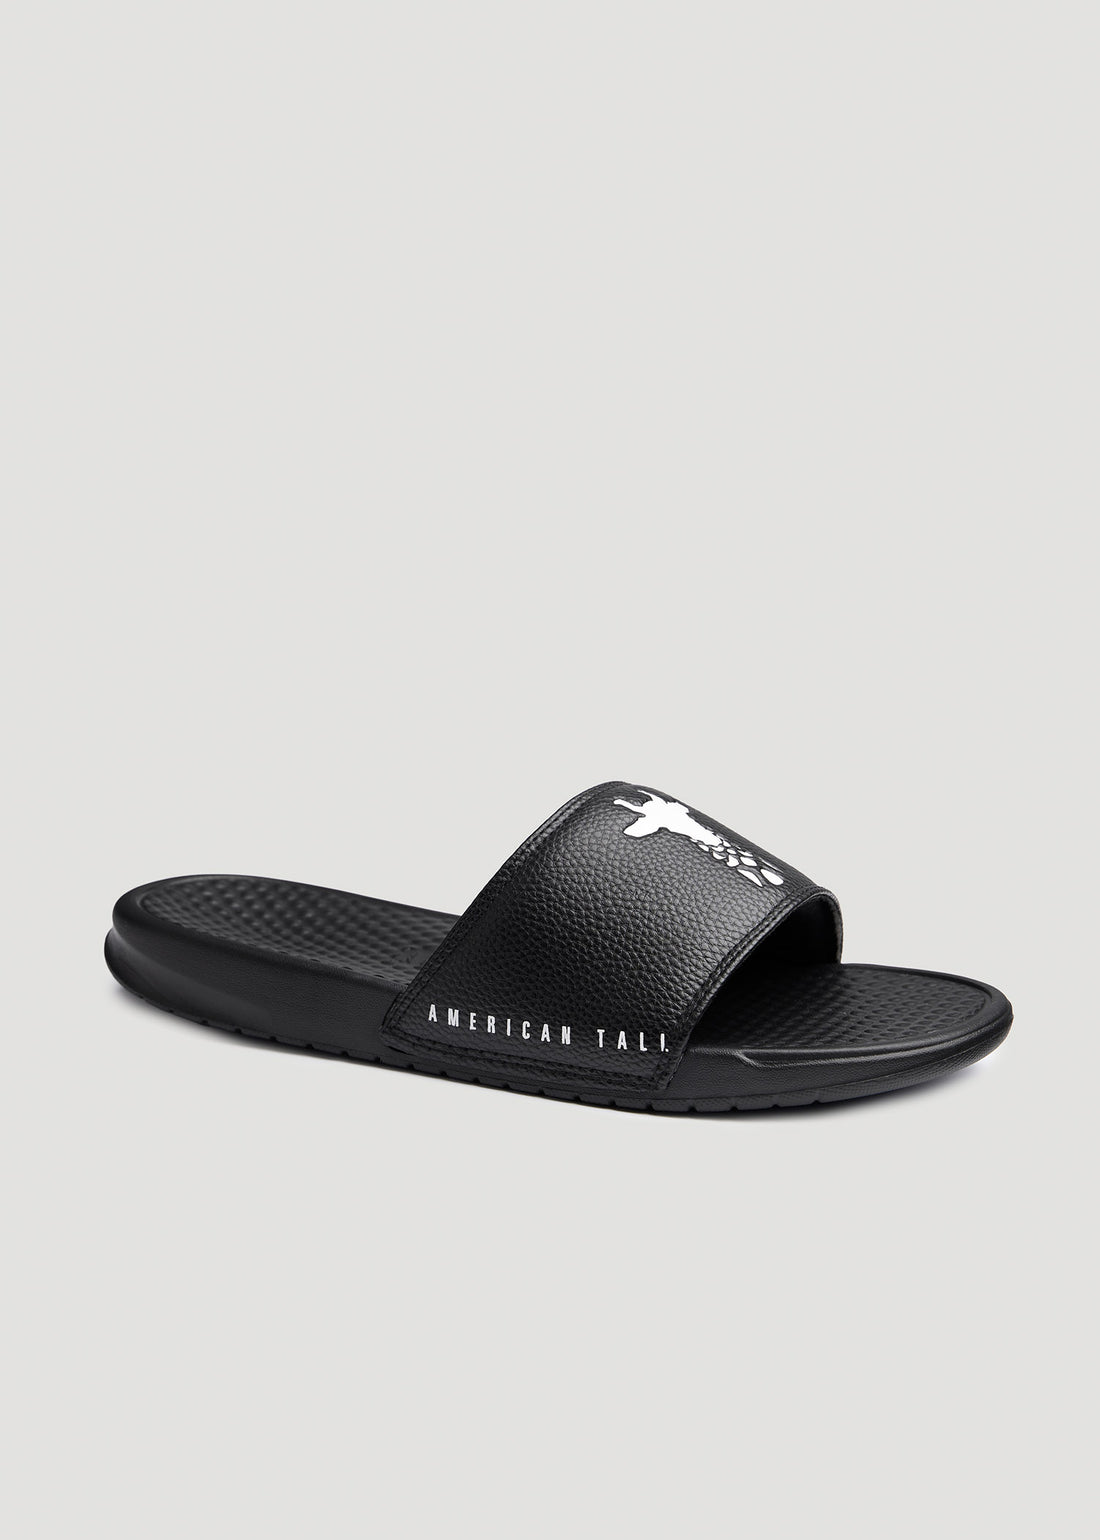 Side view of American Tall branded black slides with the white giraffe logo on the top and brand name on the side.